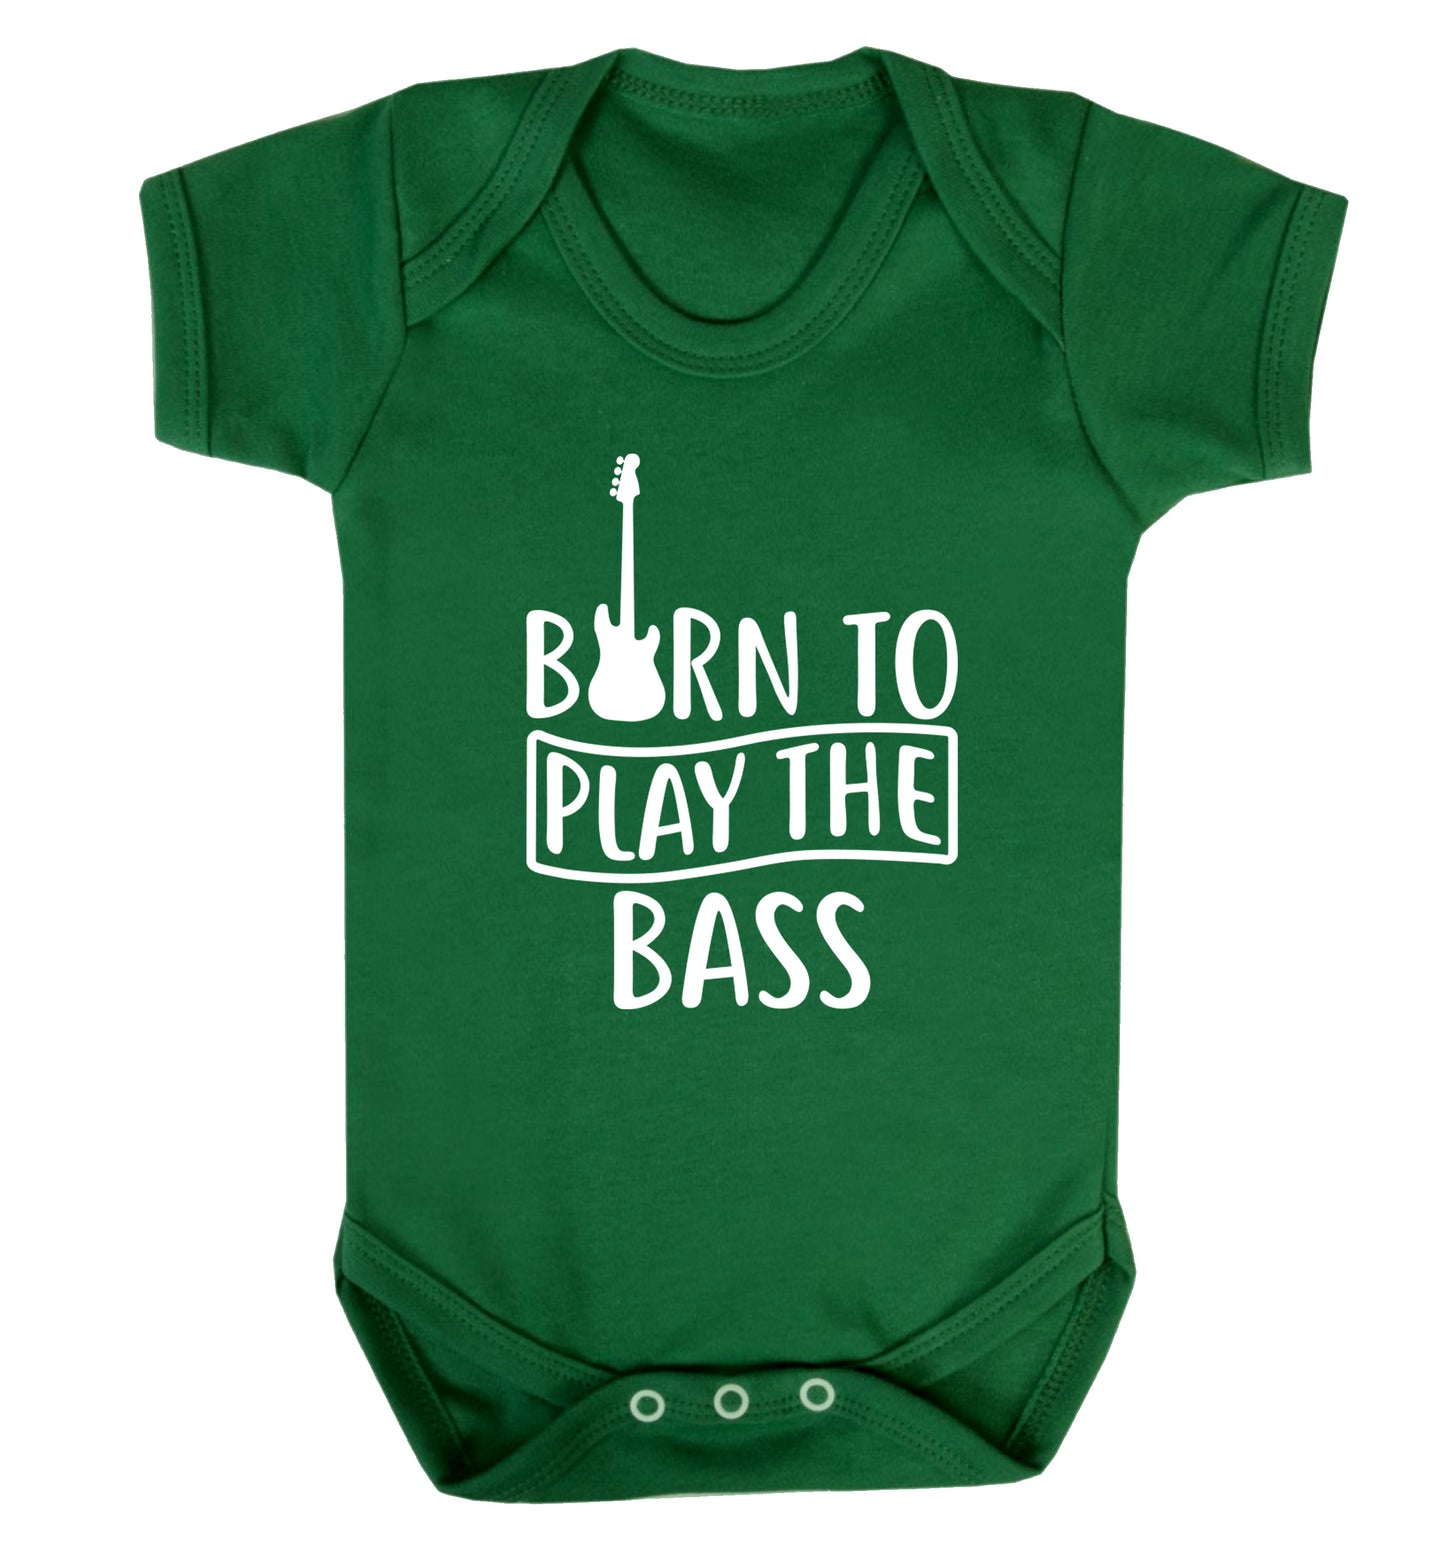 Born to play the bass Baby Vest green 18-24 months